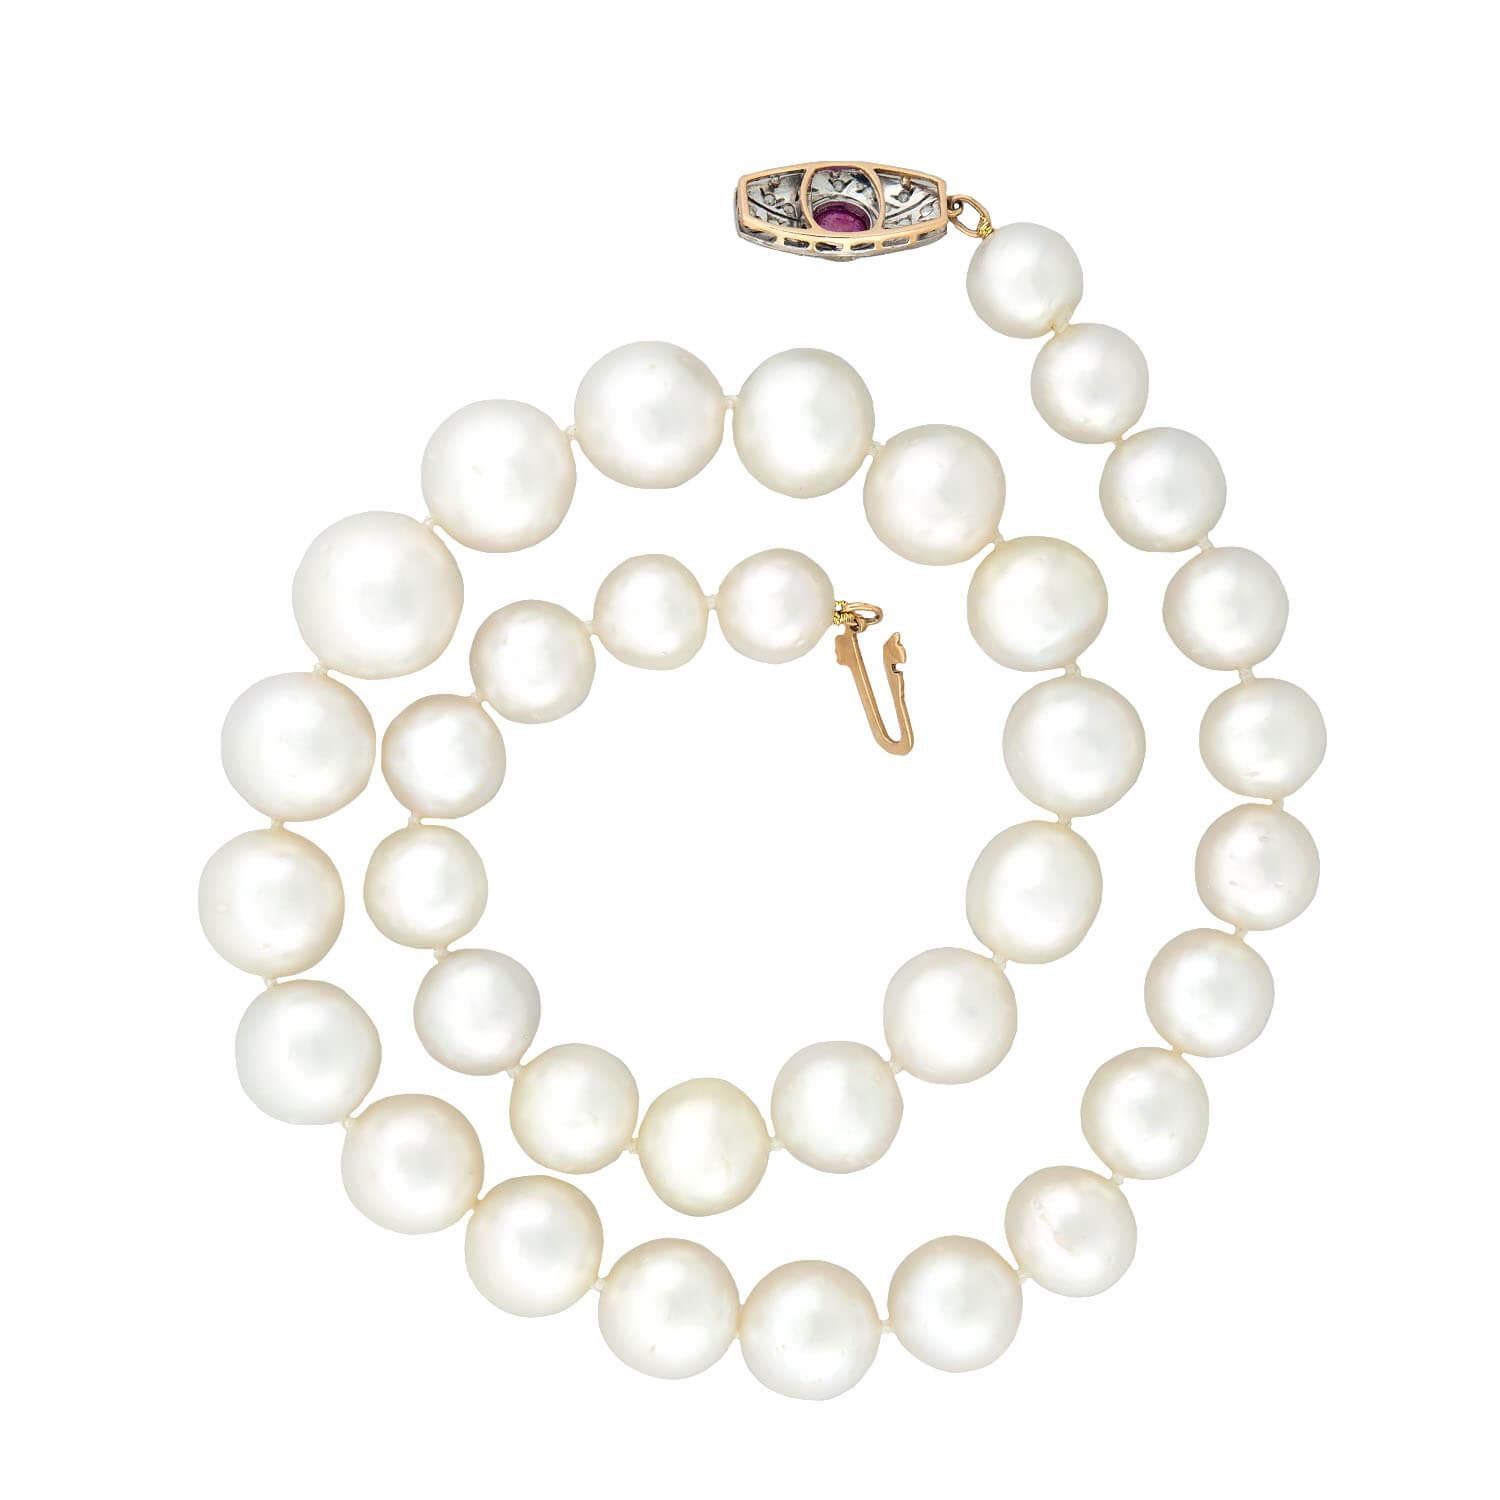 identifying pearls by clasp